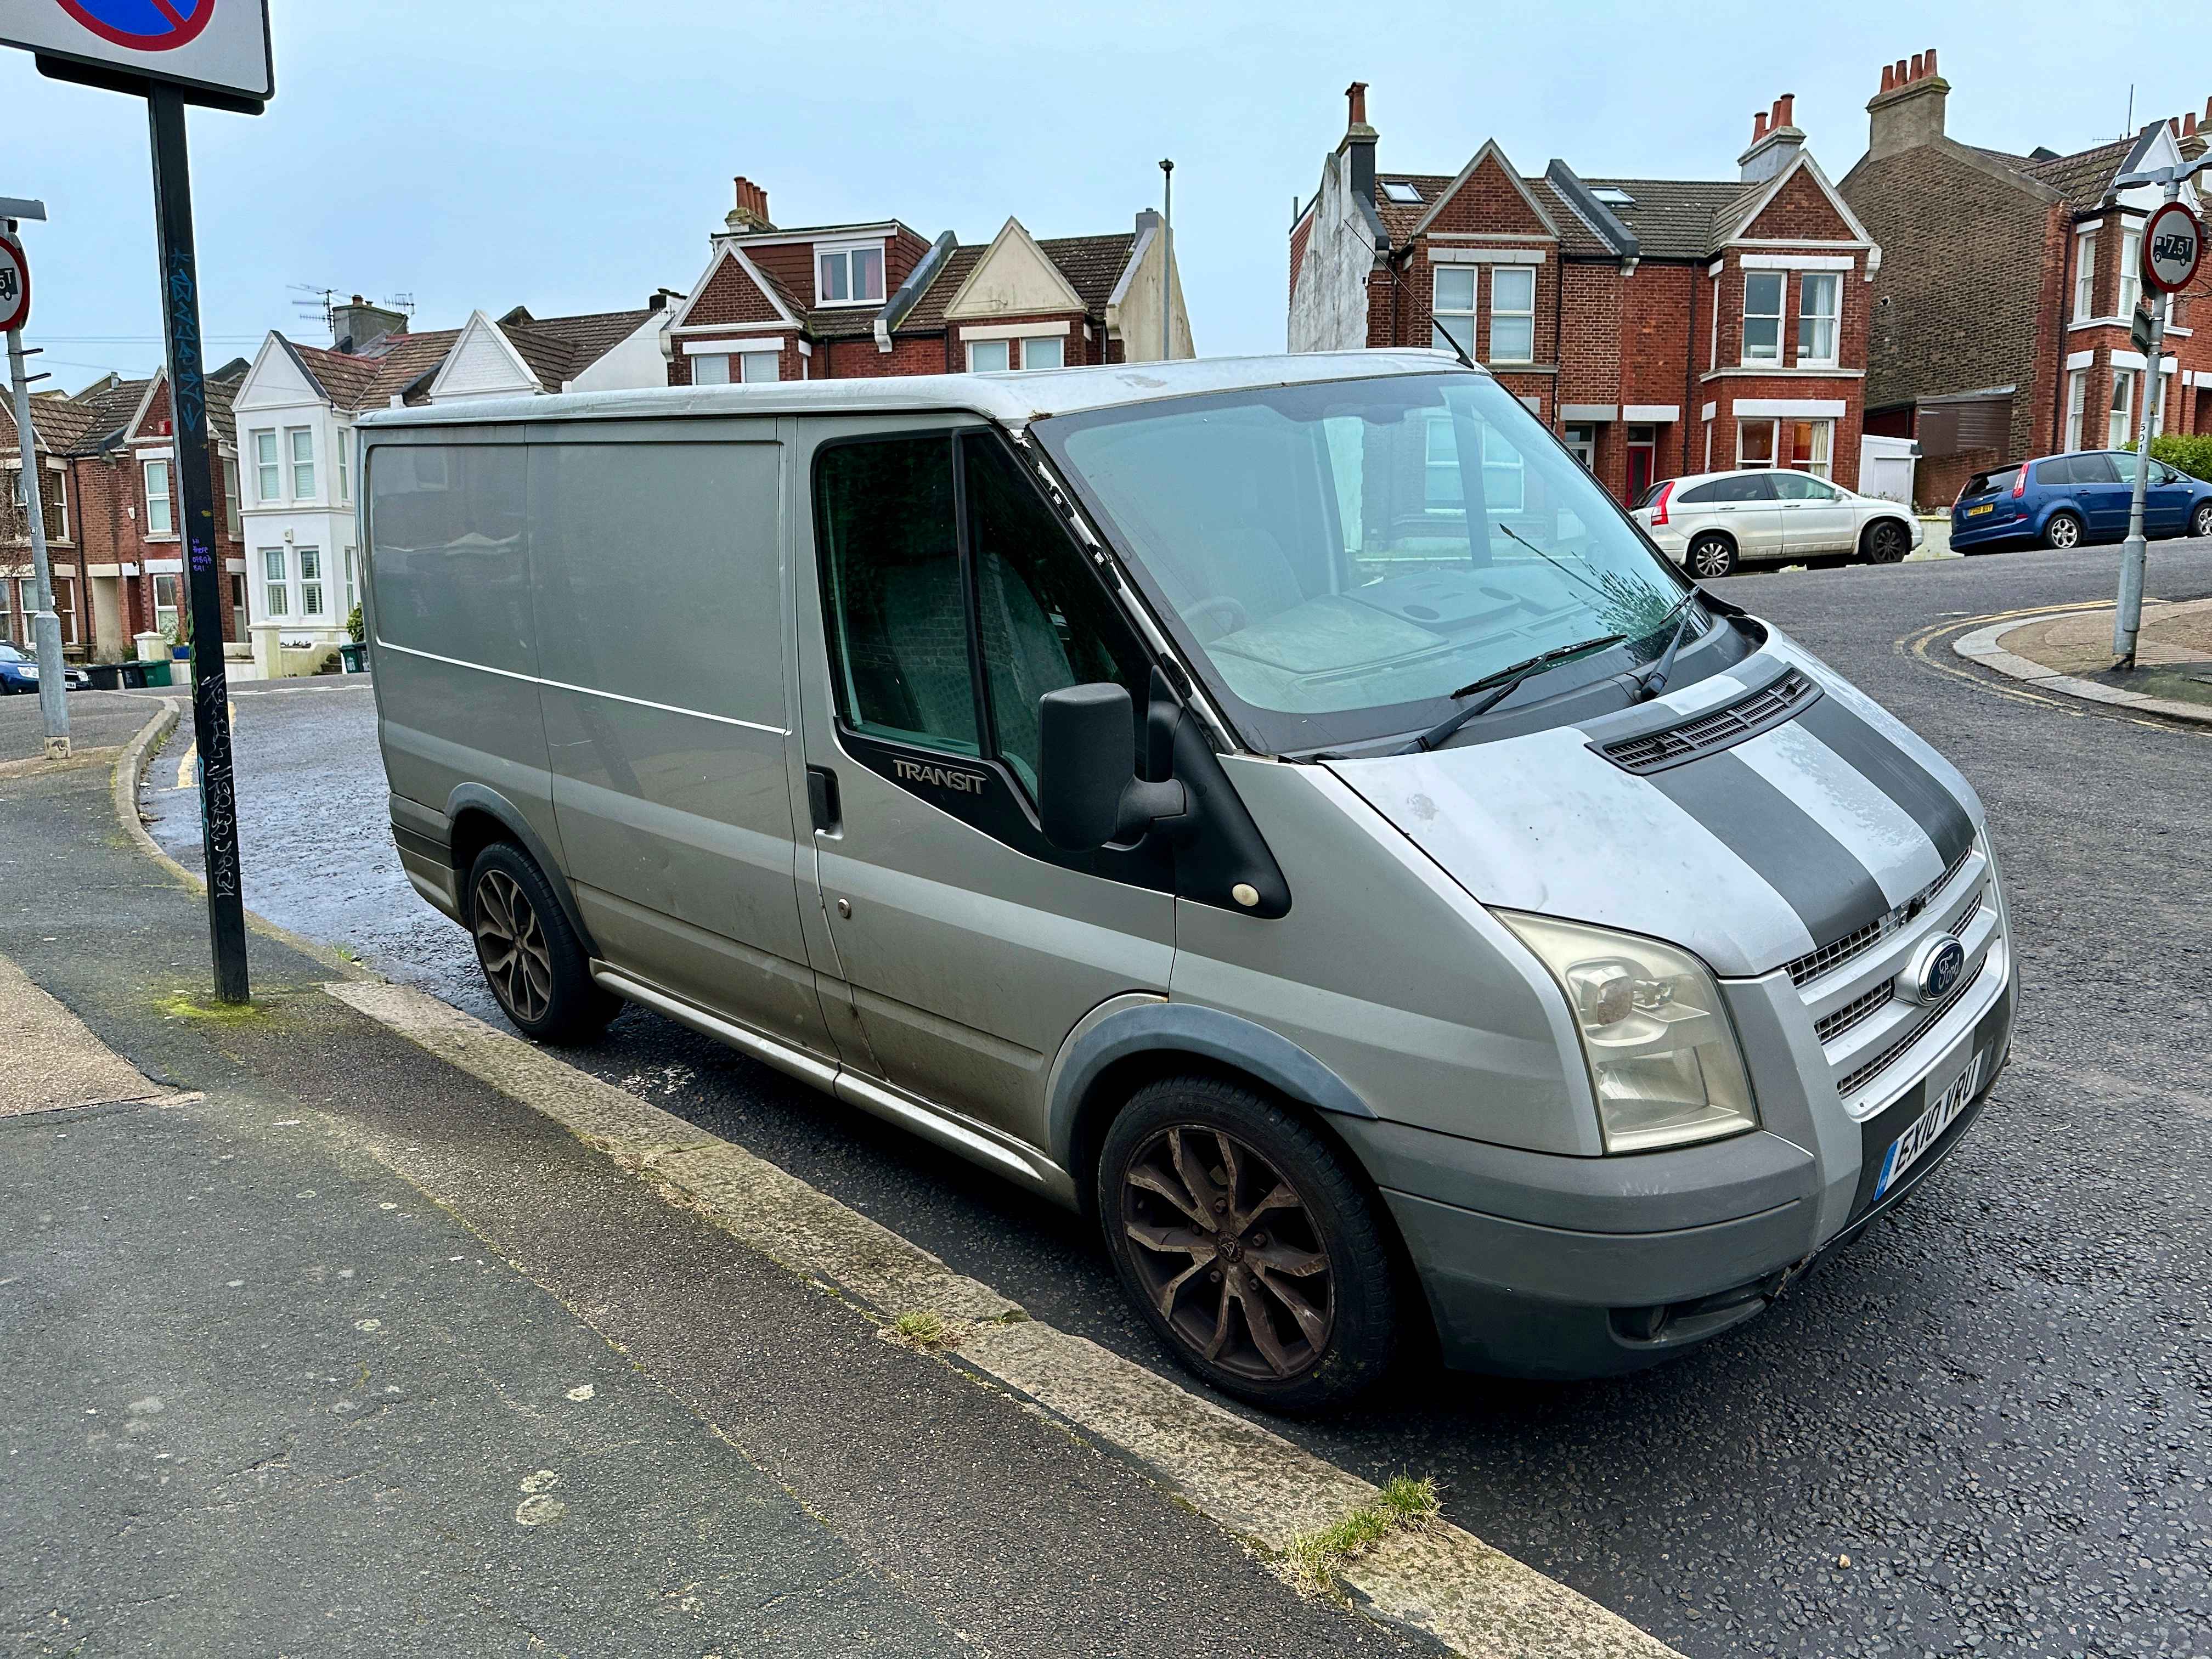 Photograph of EX10 VRU - a Silver Ford Transit parked in Hollingdean by a non-resident. The tenth of ten photographs supplied by the residents of Hollingdean.